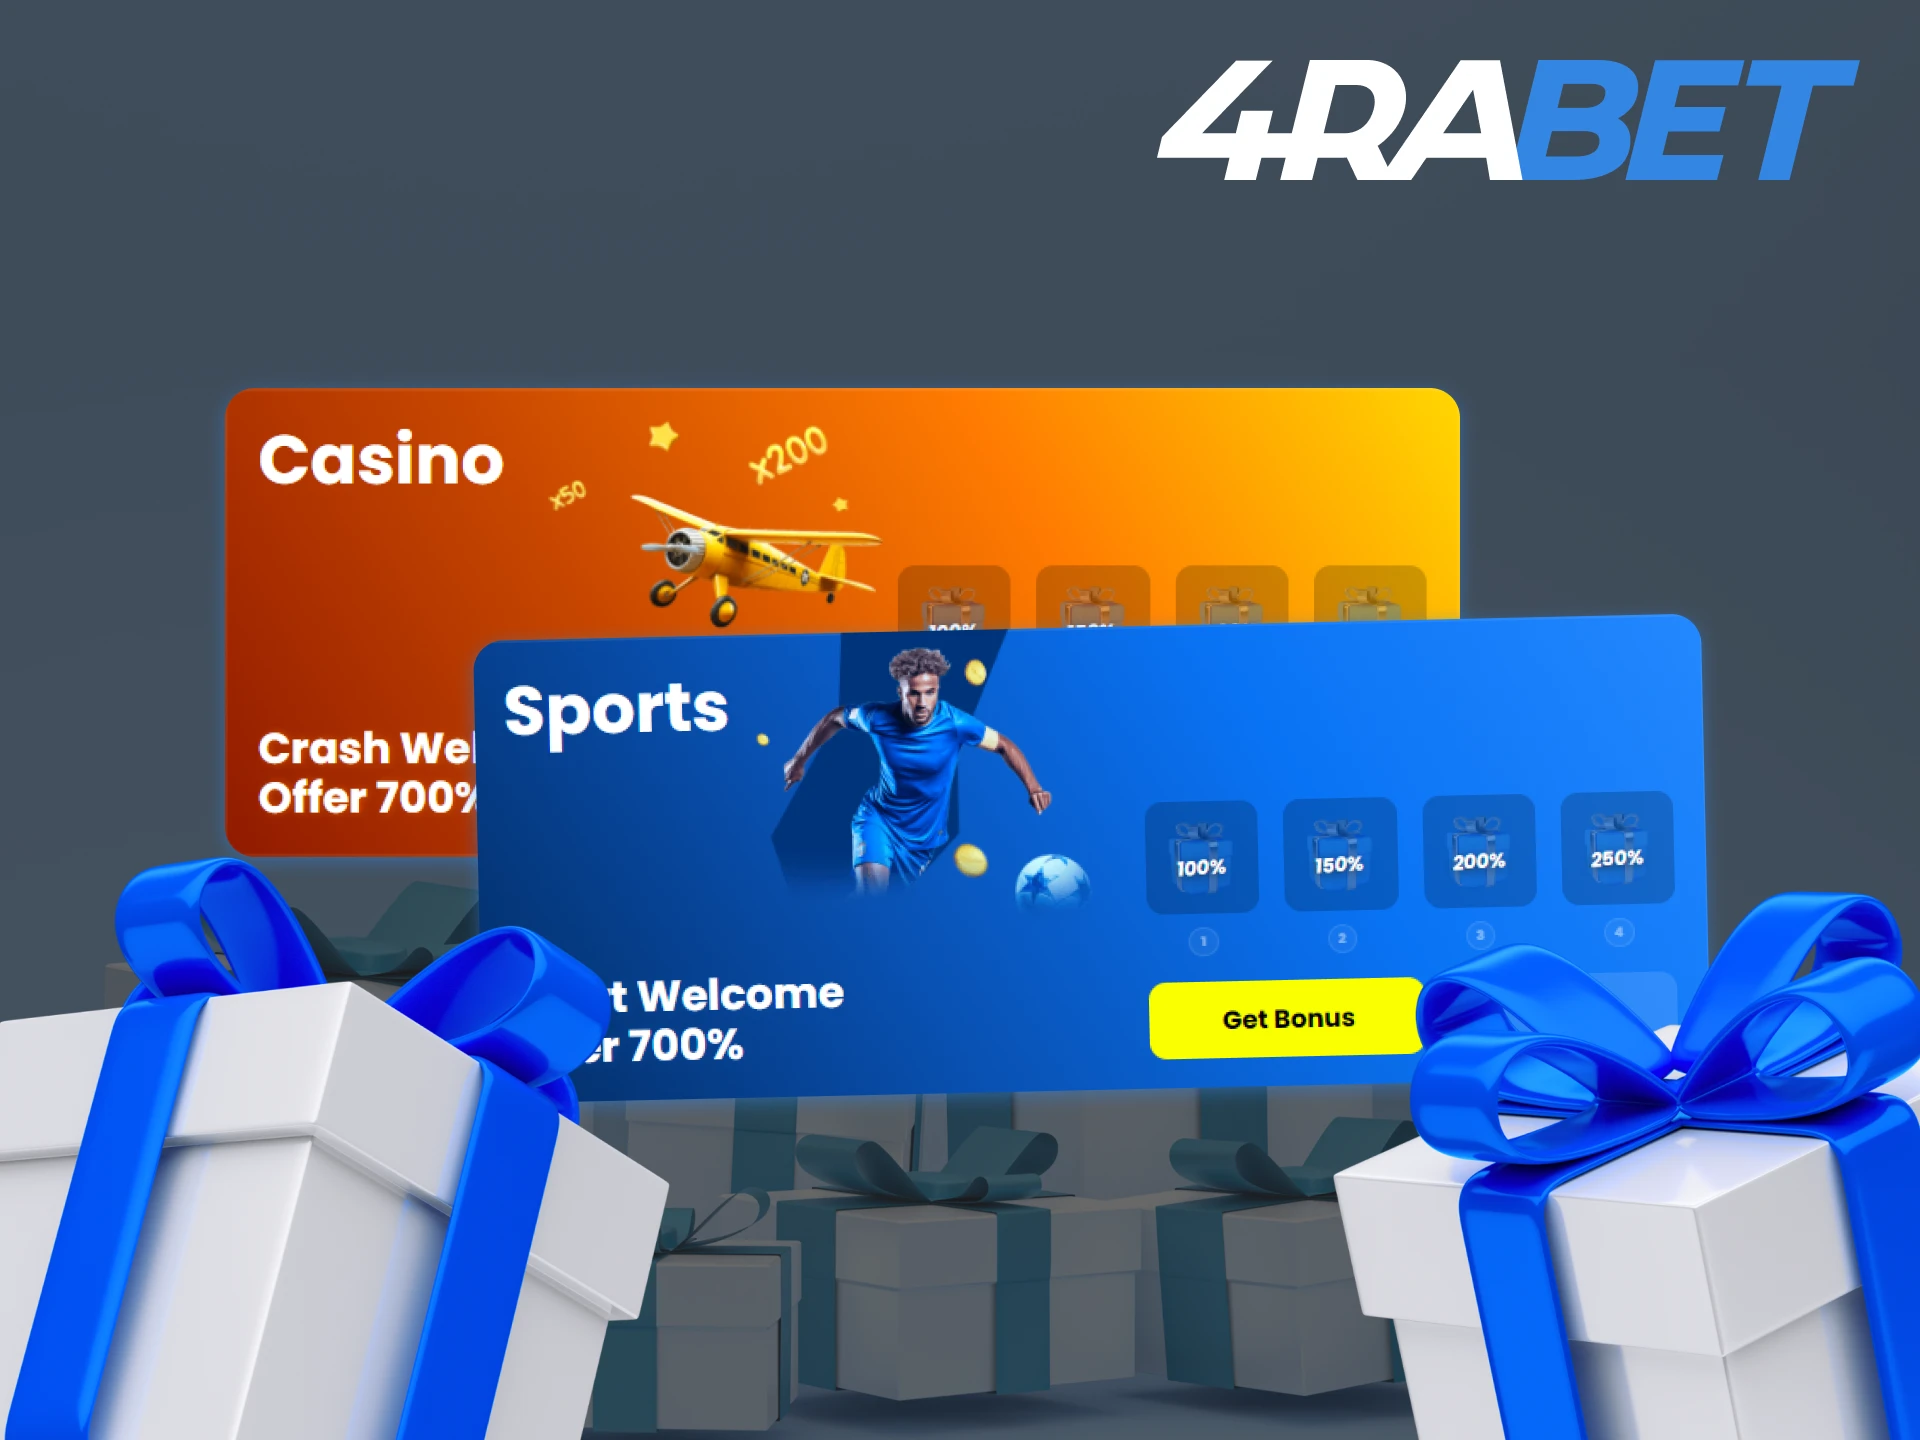 After registering on 4RaBet, you can choose a sports or casino welcome bonus.